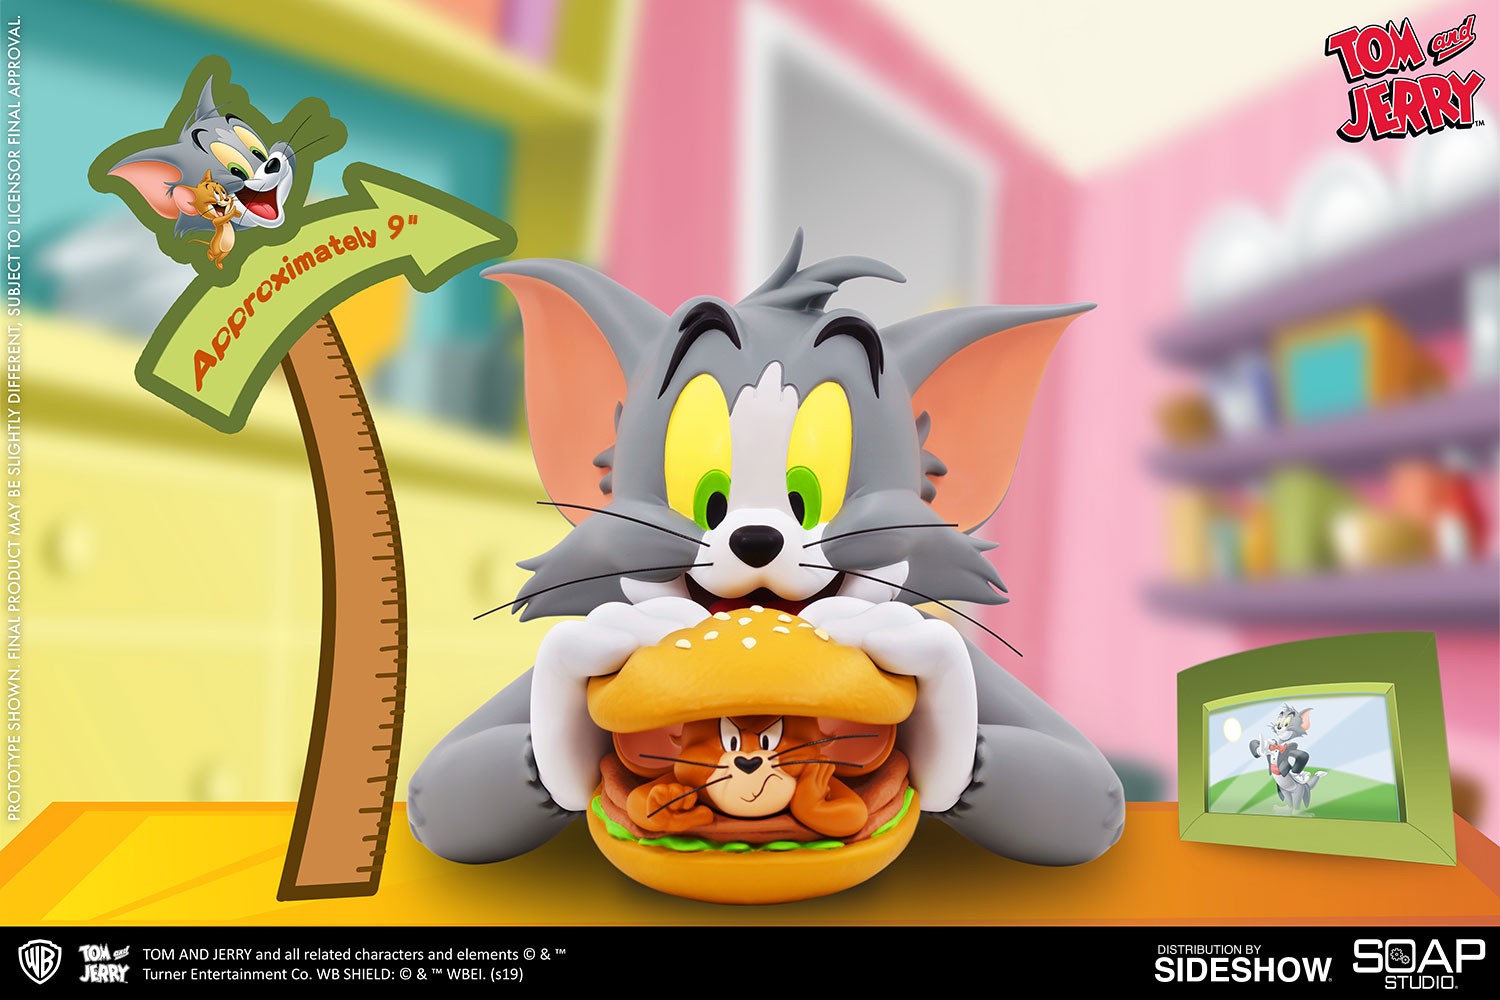 Soap Studio Tom and Jerry Burger Bust | Sideshow Collectibles | T-Shirts